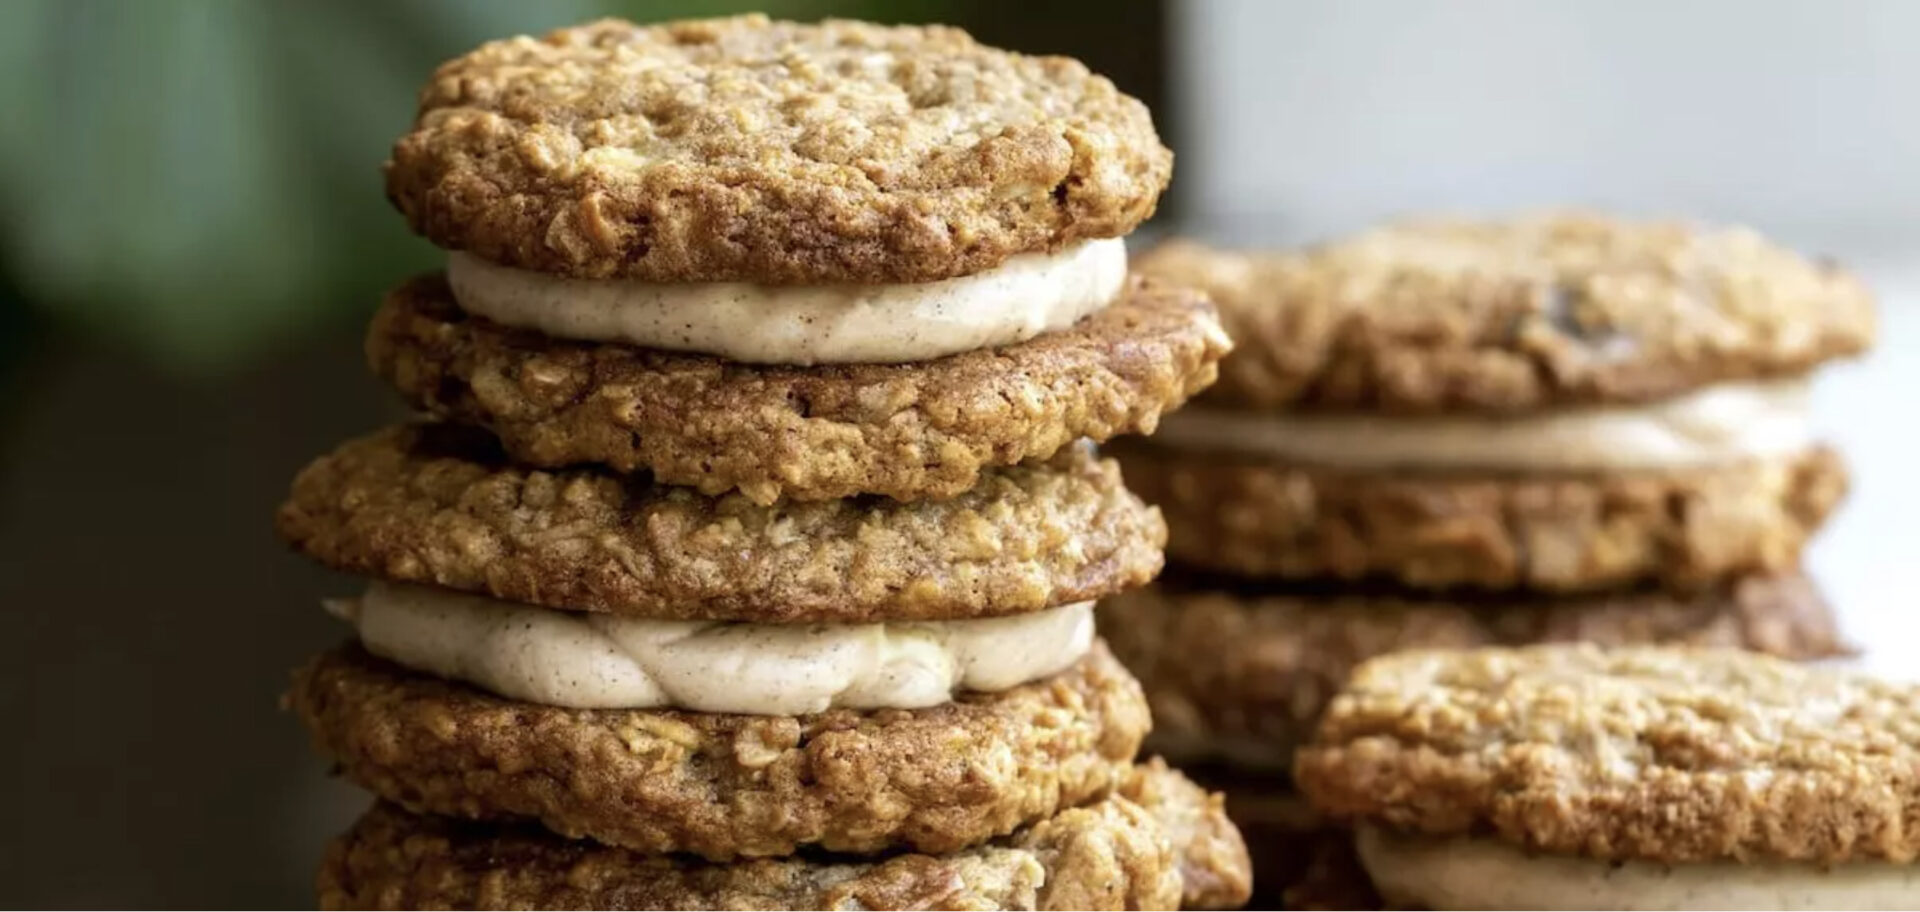 Apple Butter Oatmeal Cream Pies for Sunday Baking